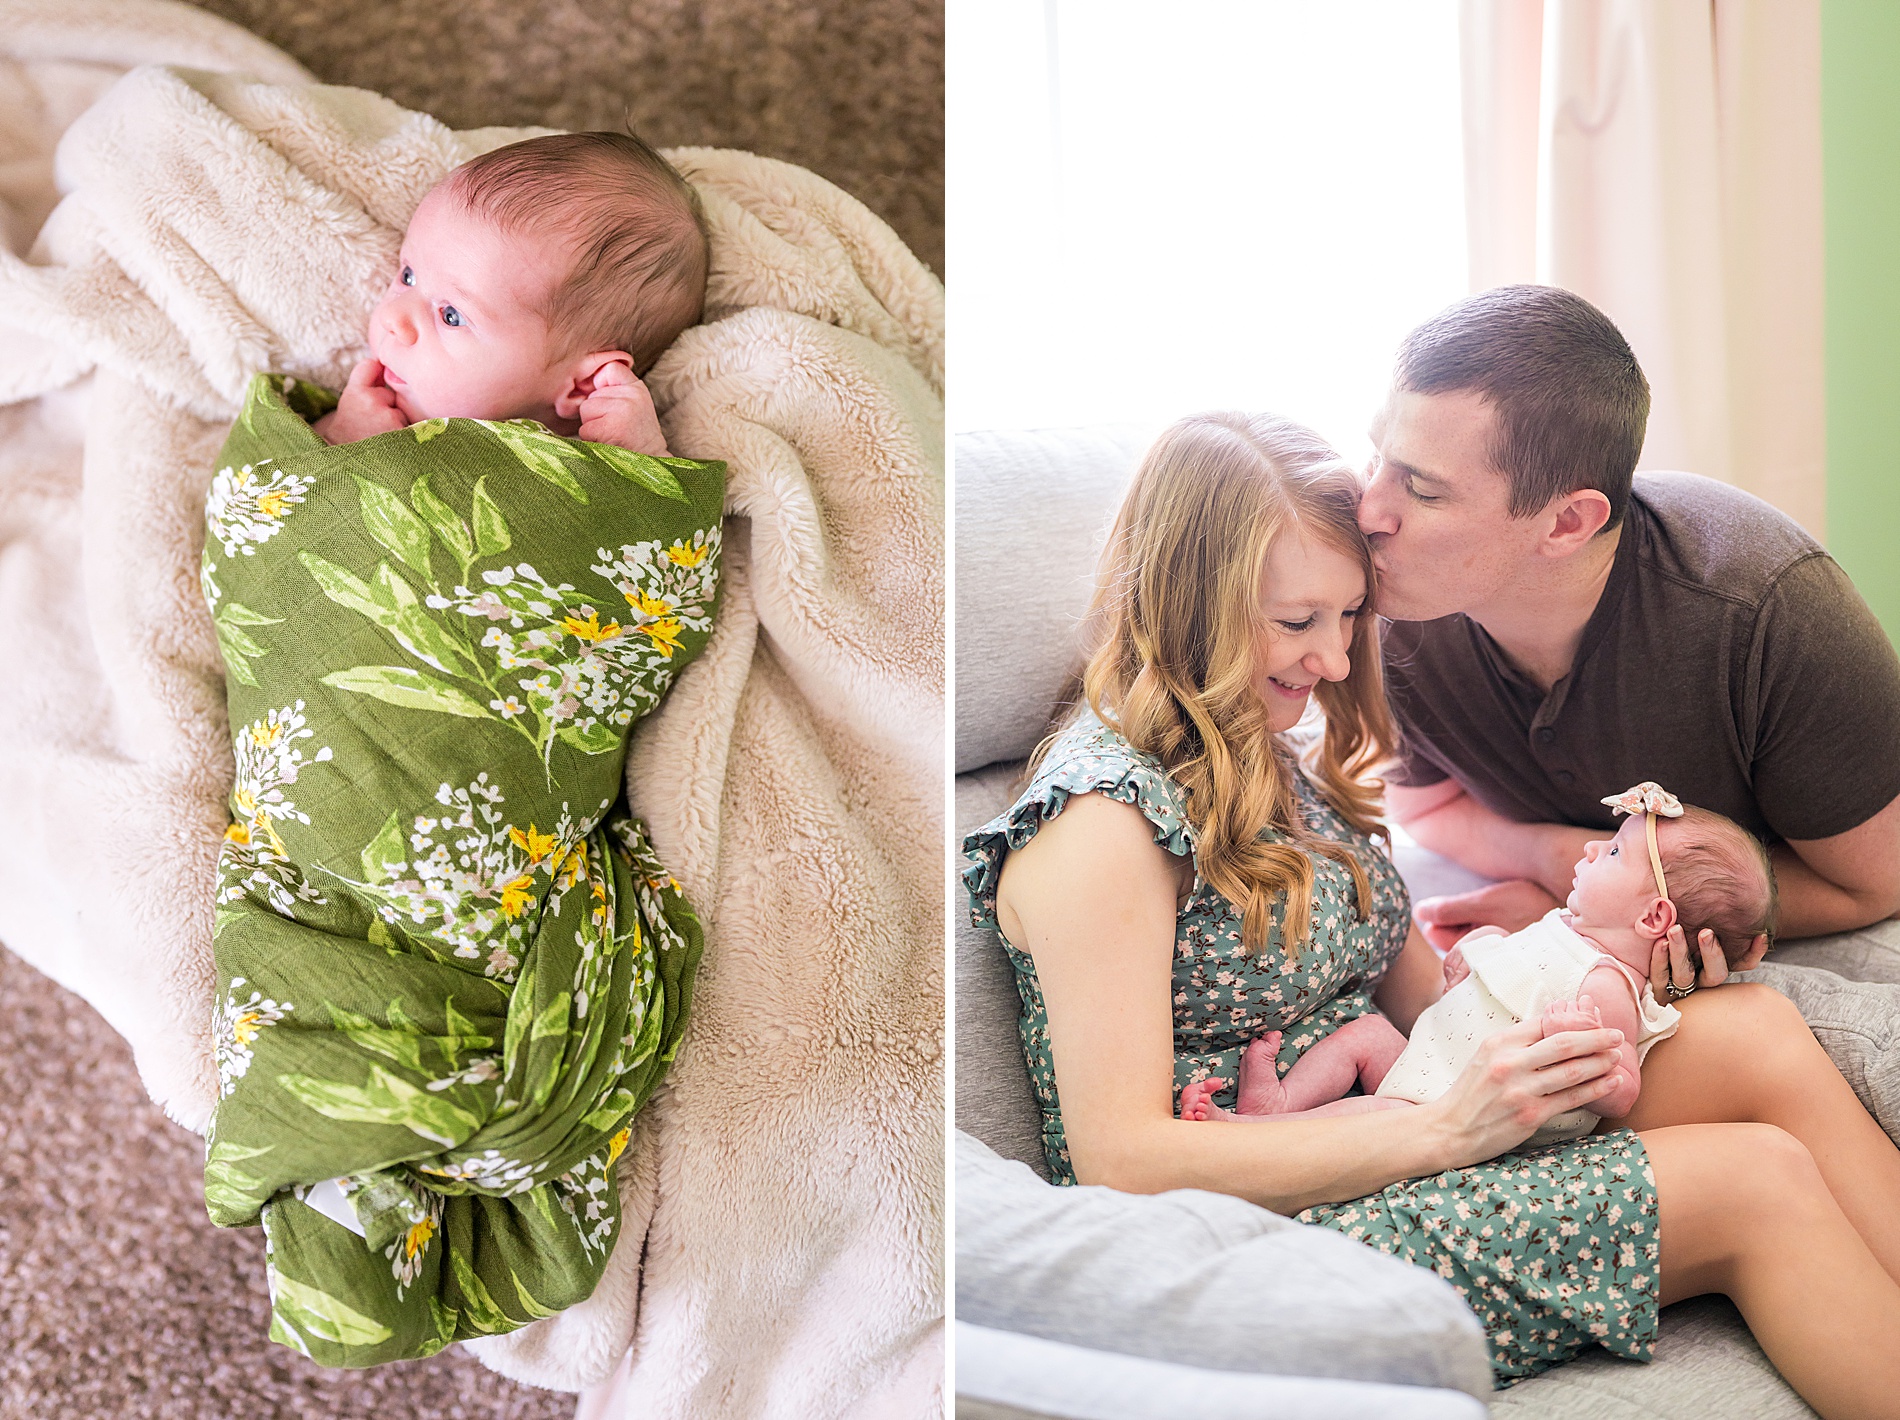 baby wrapped in floral green blanket with parents